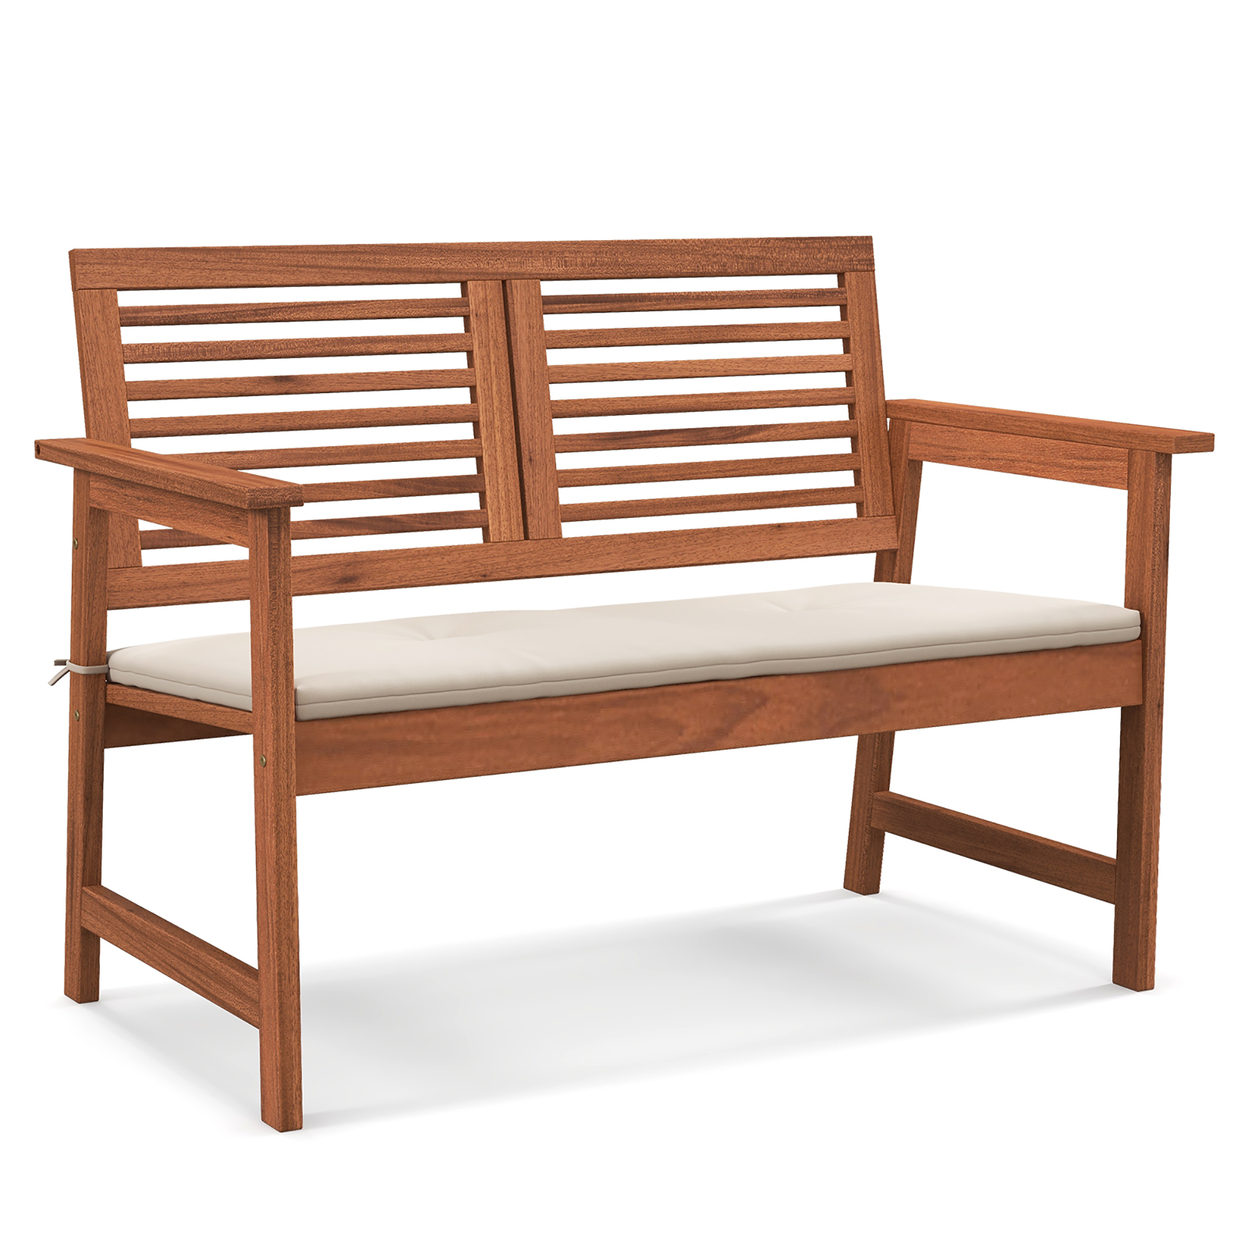 Outdoor Bench With Cushion 2-Person Patio Bench W/Slatted Back & Seat Garden Backyard Balcony